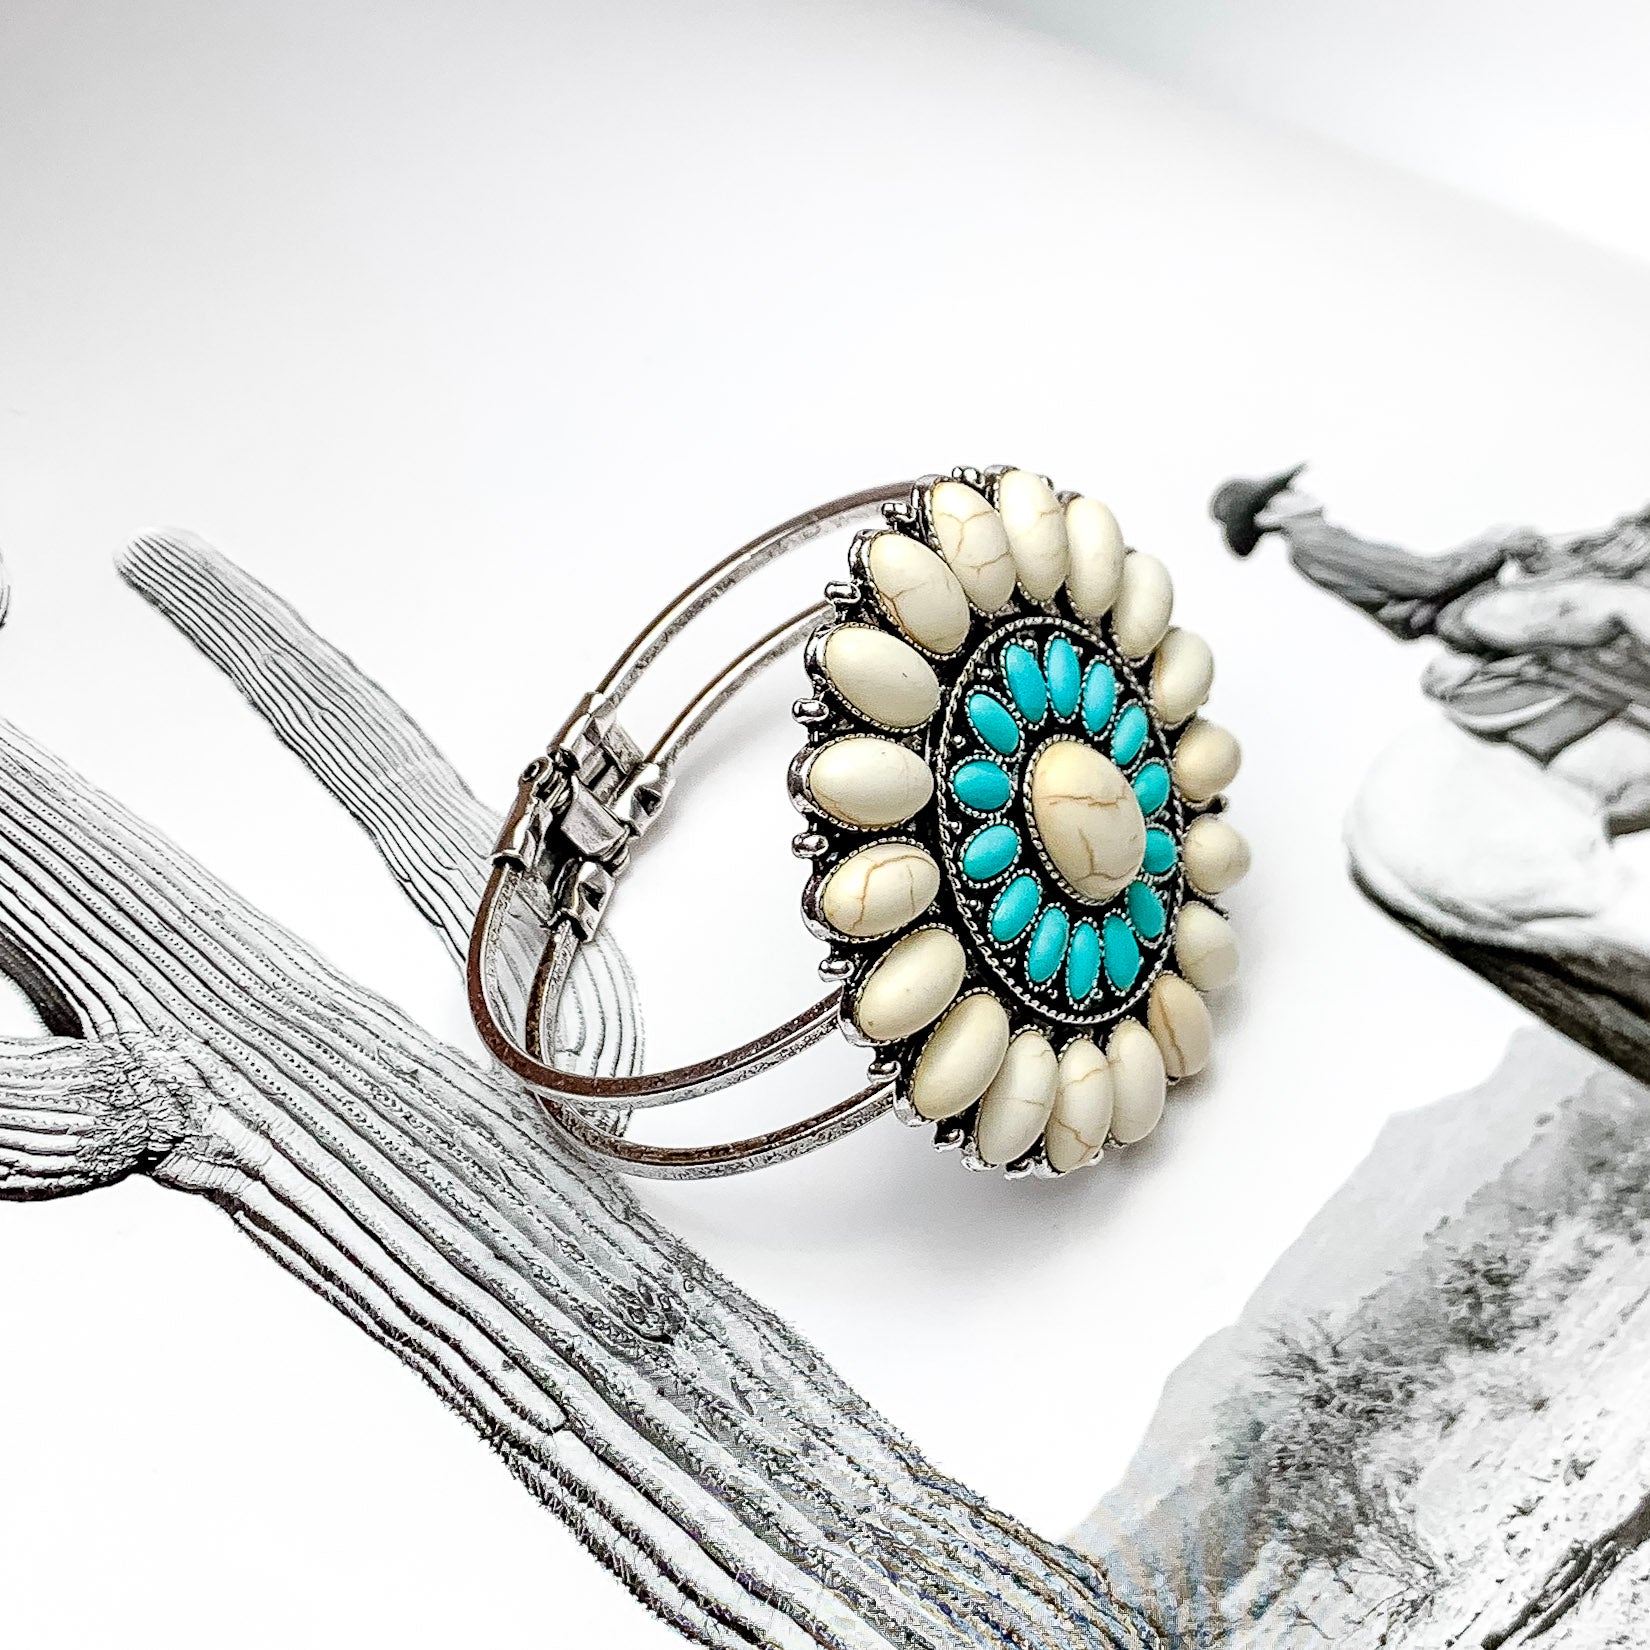 Ivory and Turquoise Oval Stone Concho Hinge Cuff Bracelet - Giddy Up Glamour Boutique